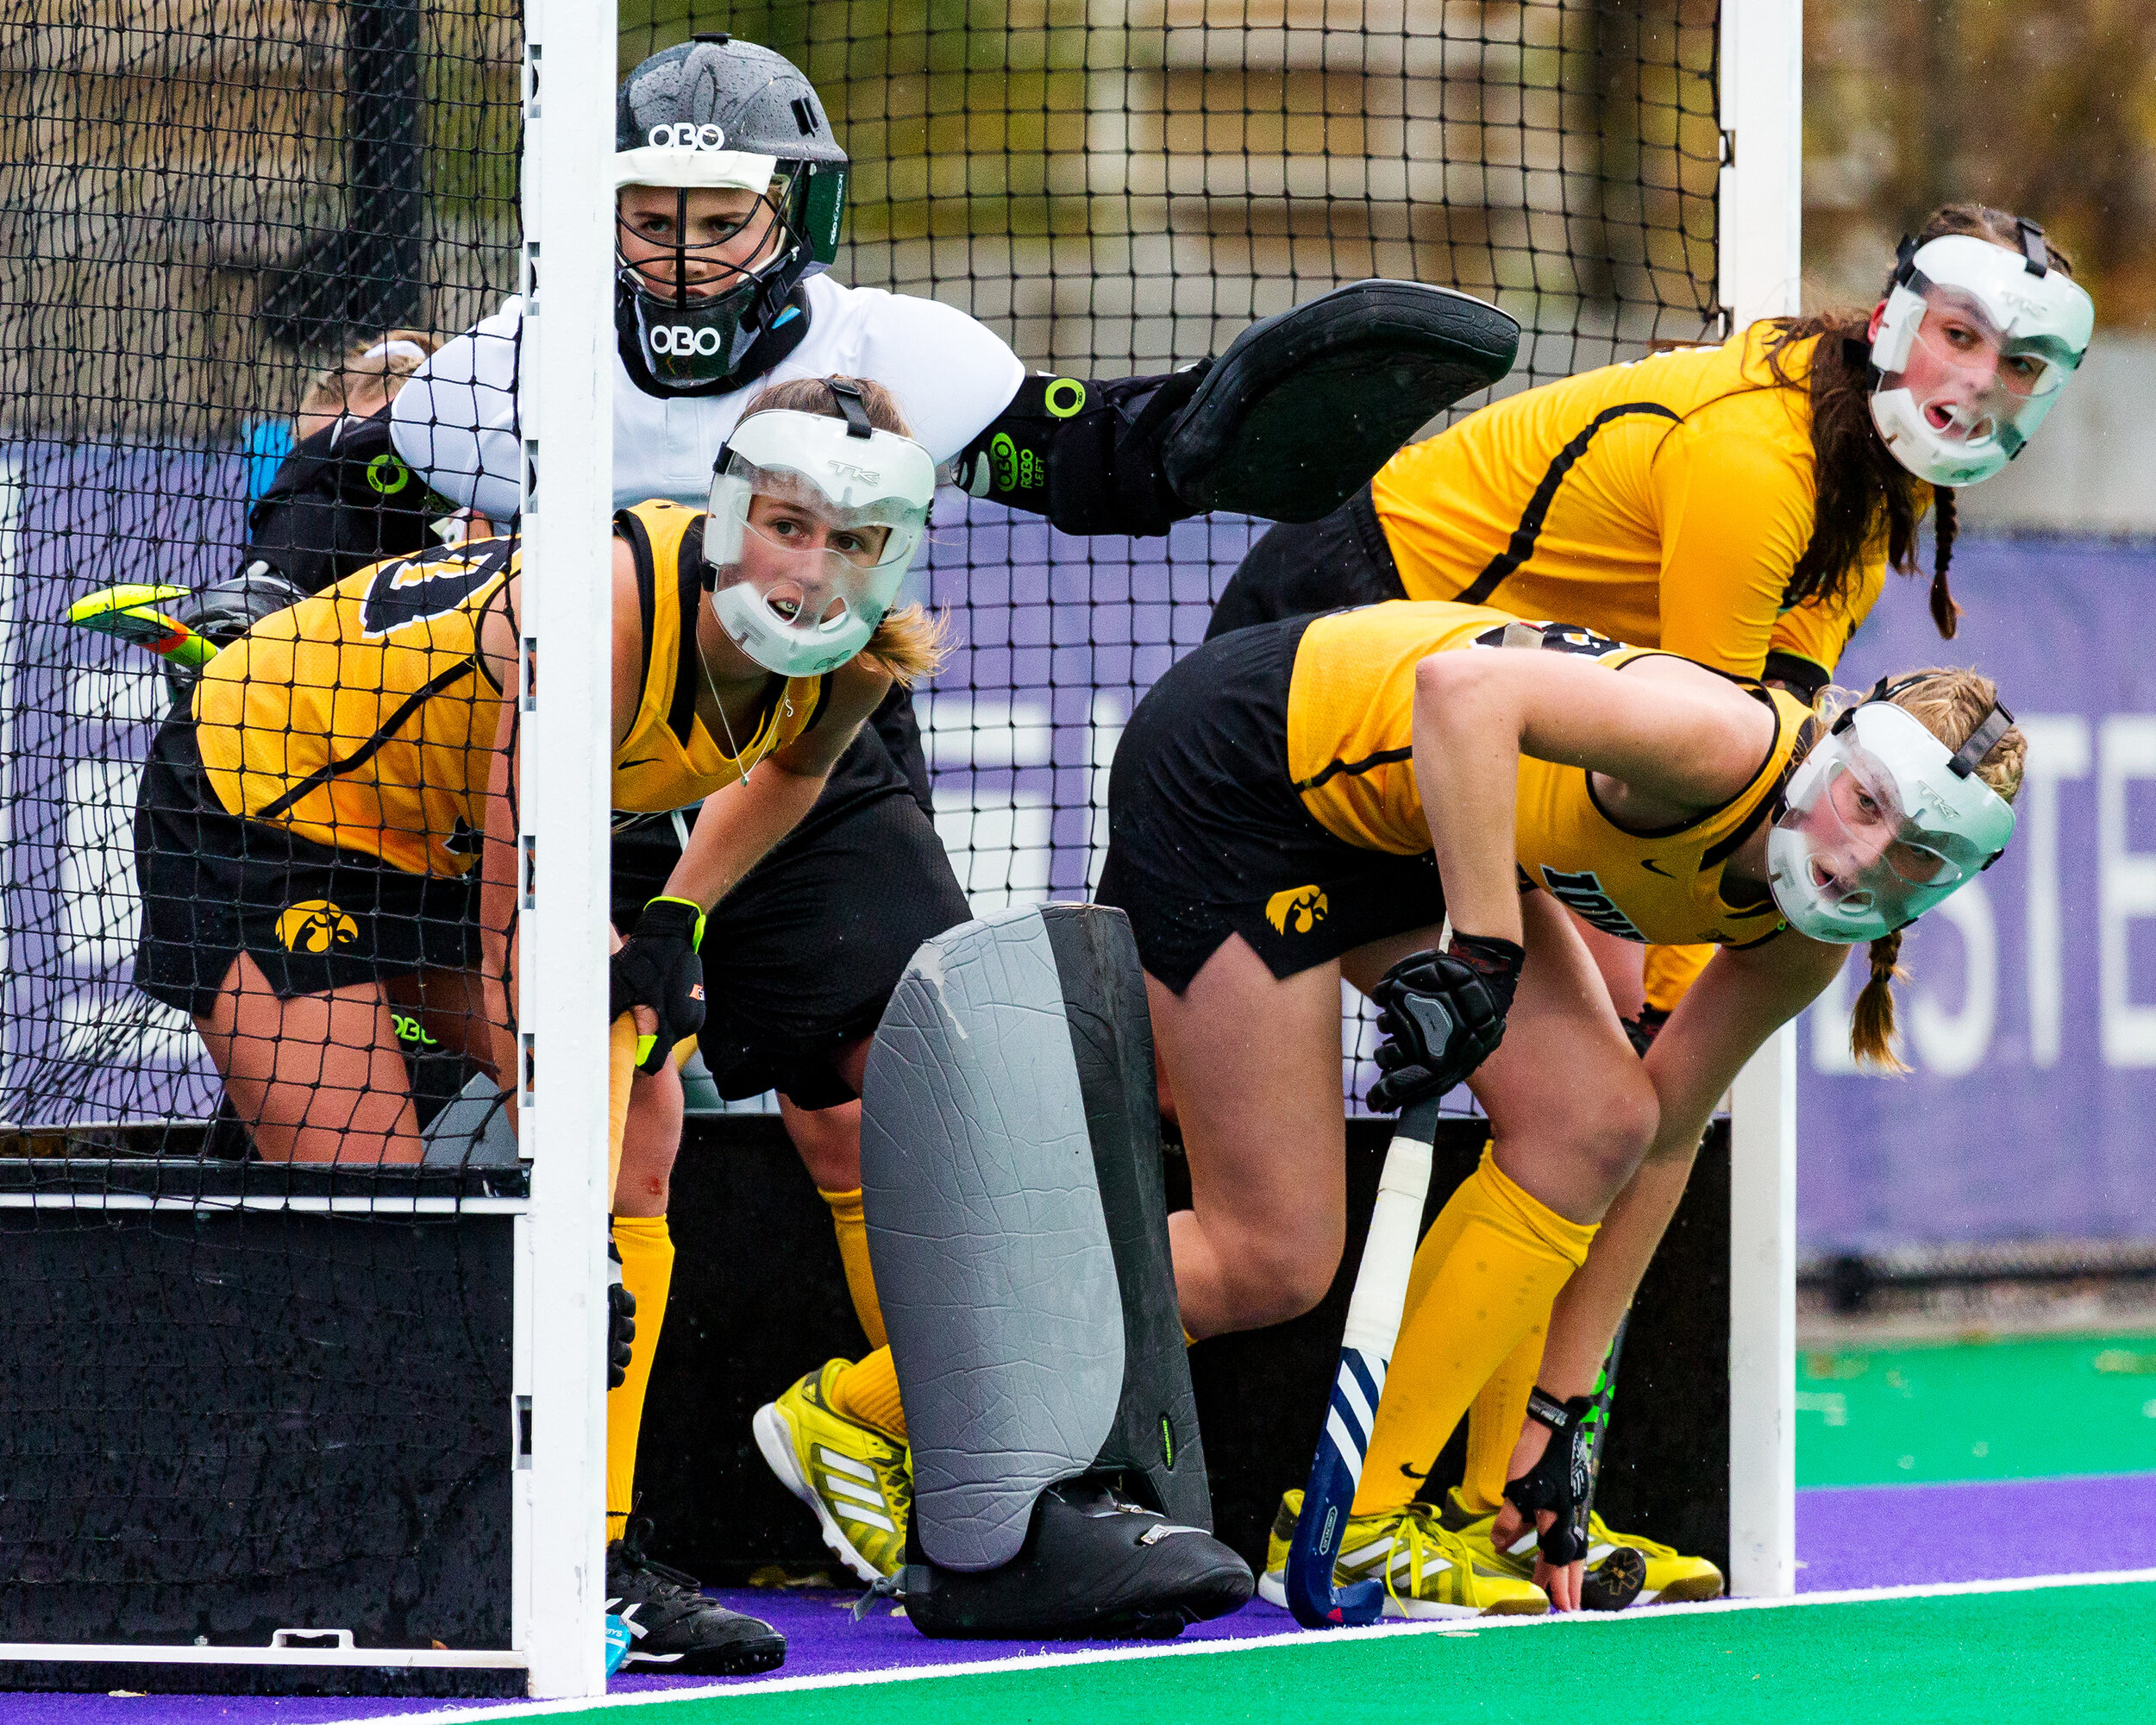  Iowa players stand in the goal to defend a penalty corner during the Championship Game in the Big Ten Field Hockey Tournament at Lakeside Field in Evanston, IL on Sunday, Nov. 3, 2018. The no. 2 ranked Terrapins defeated the no. 8 ranked Hawkeyes 2-